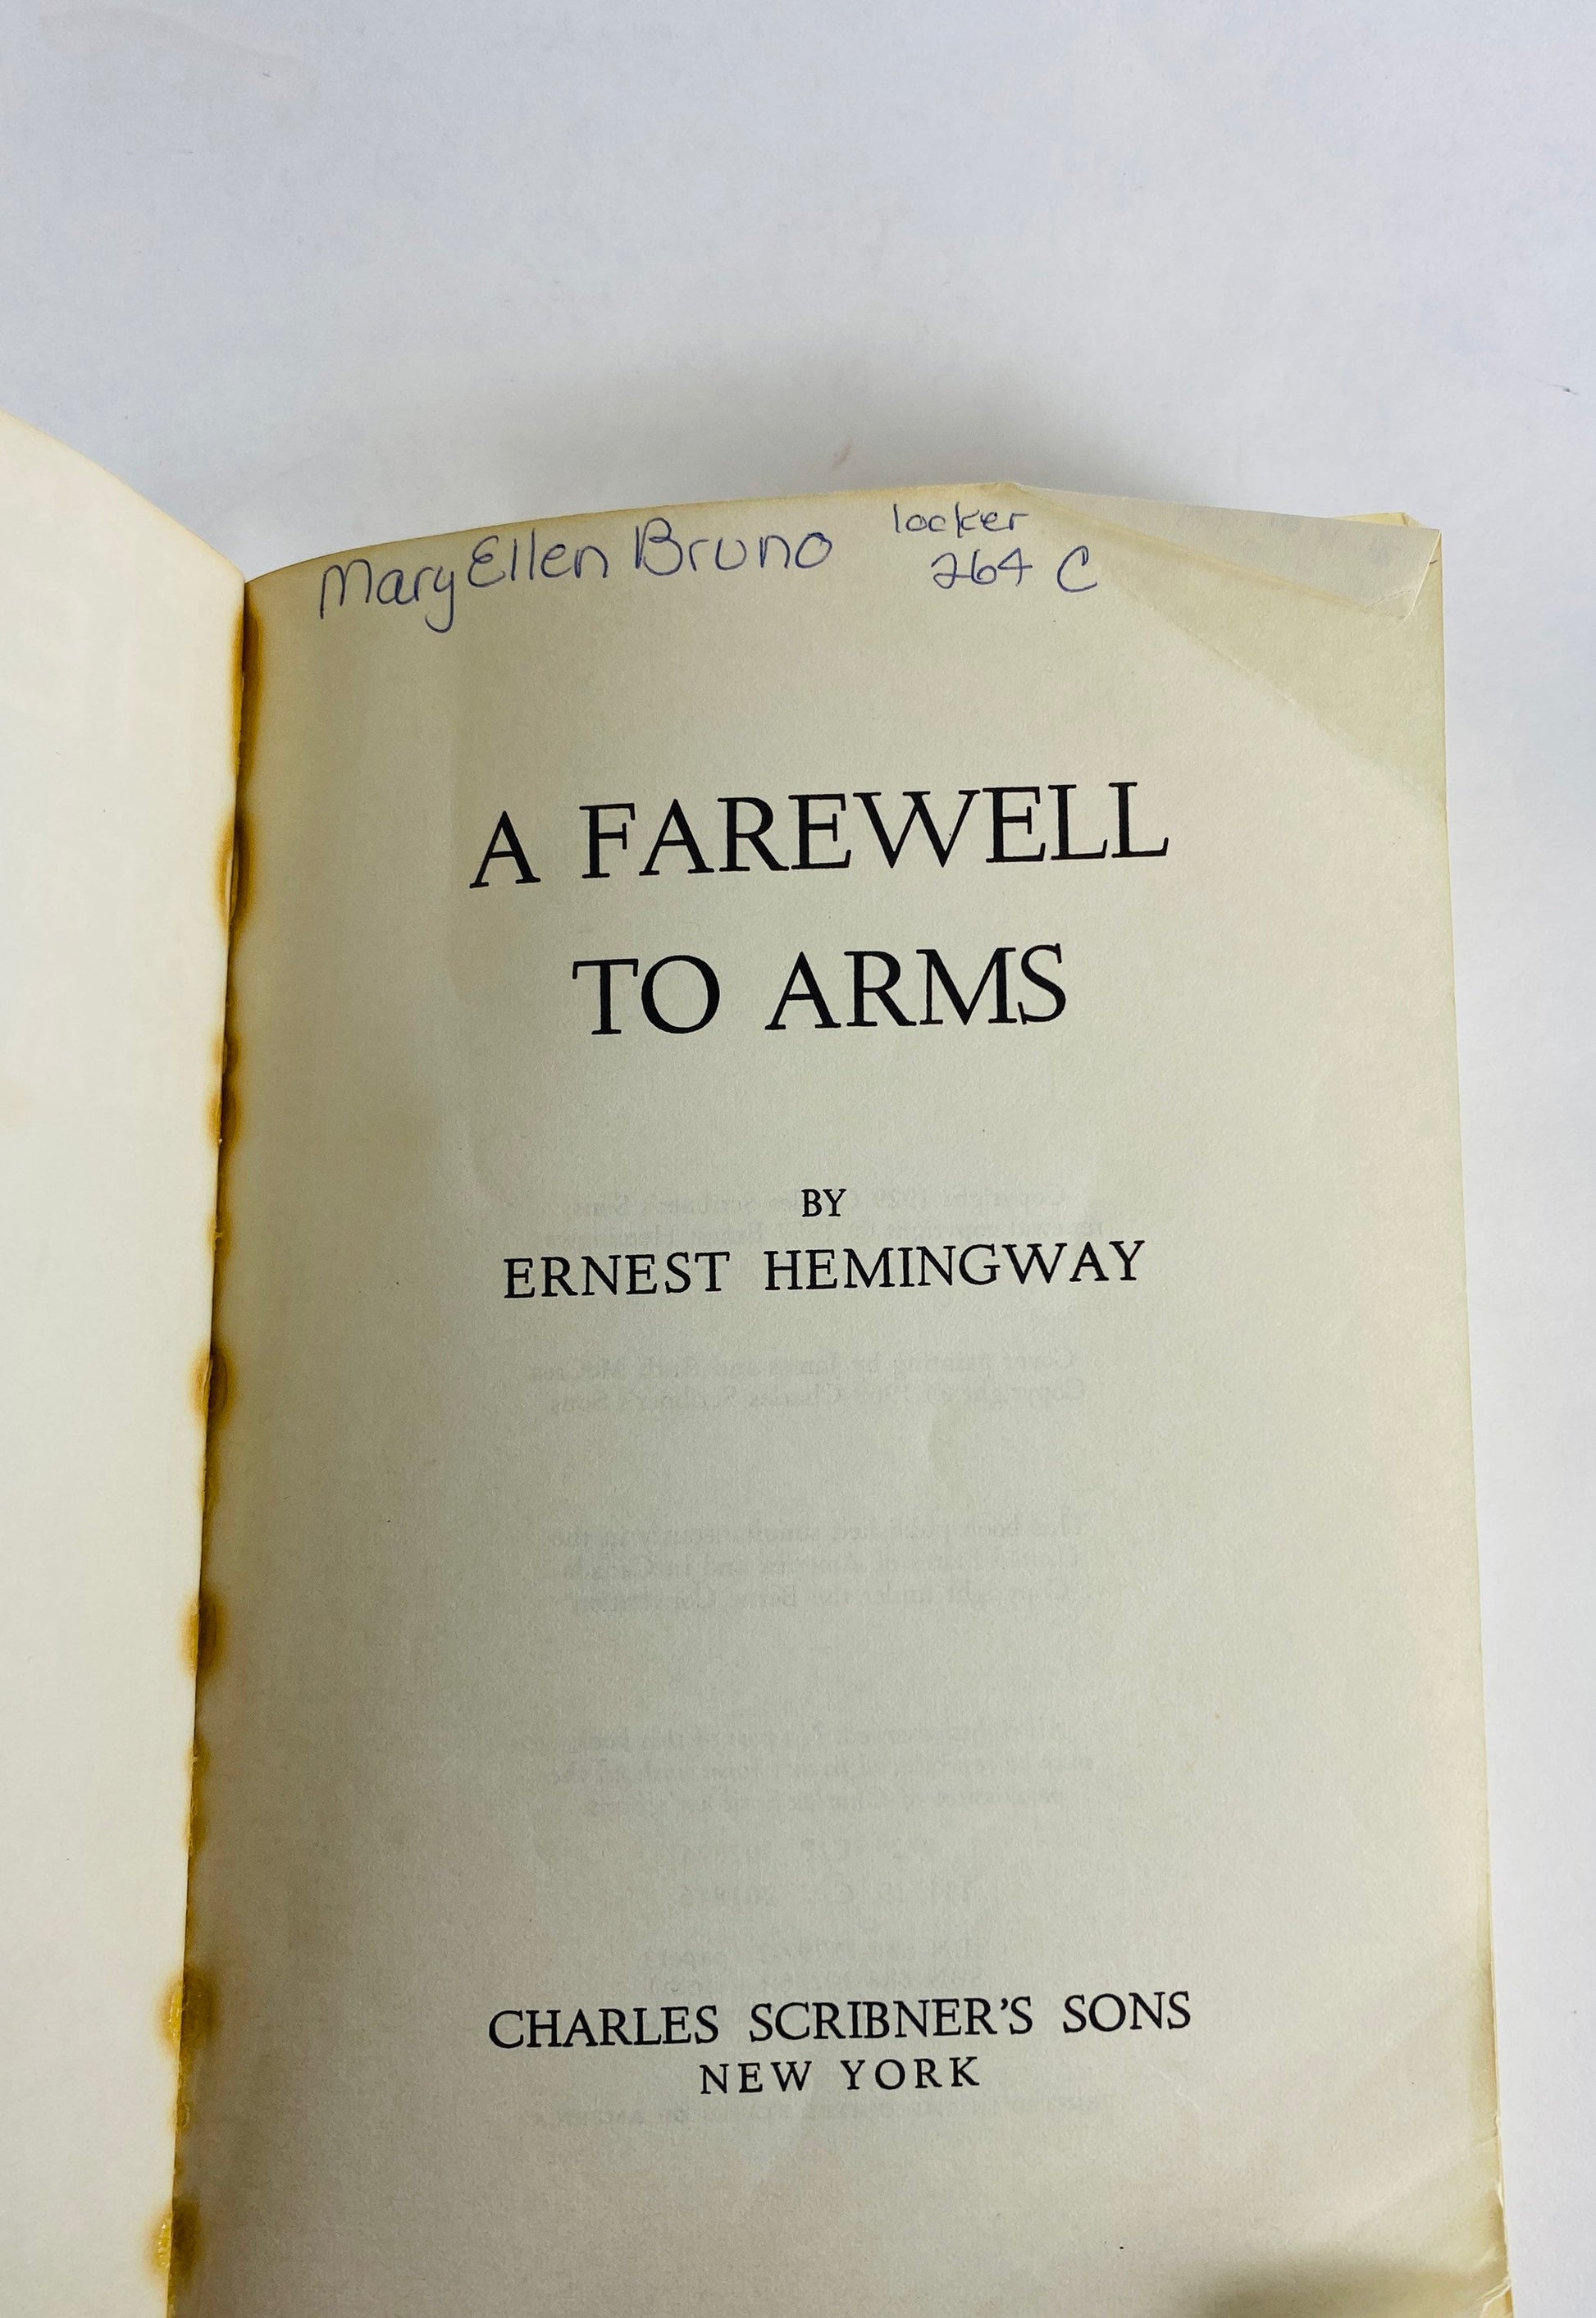 Hemingway Farewell to Arms Vintage Scribner's Library paperback book circa 1969 Grey home office decor. Collectible gift